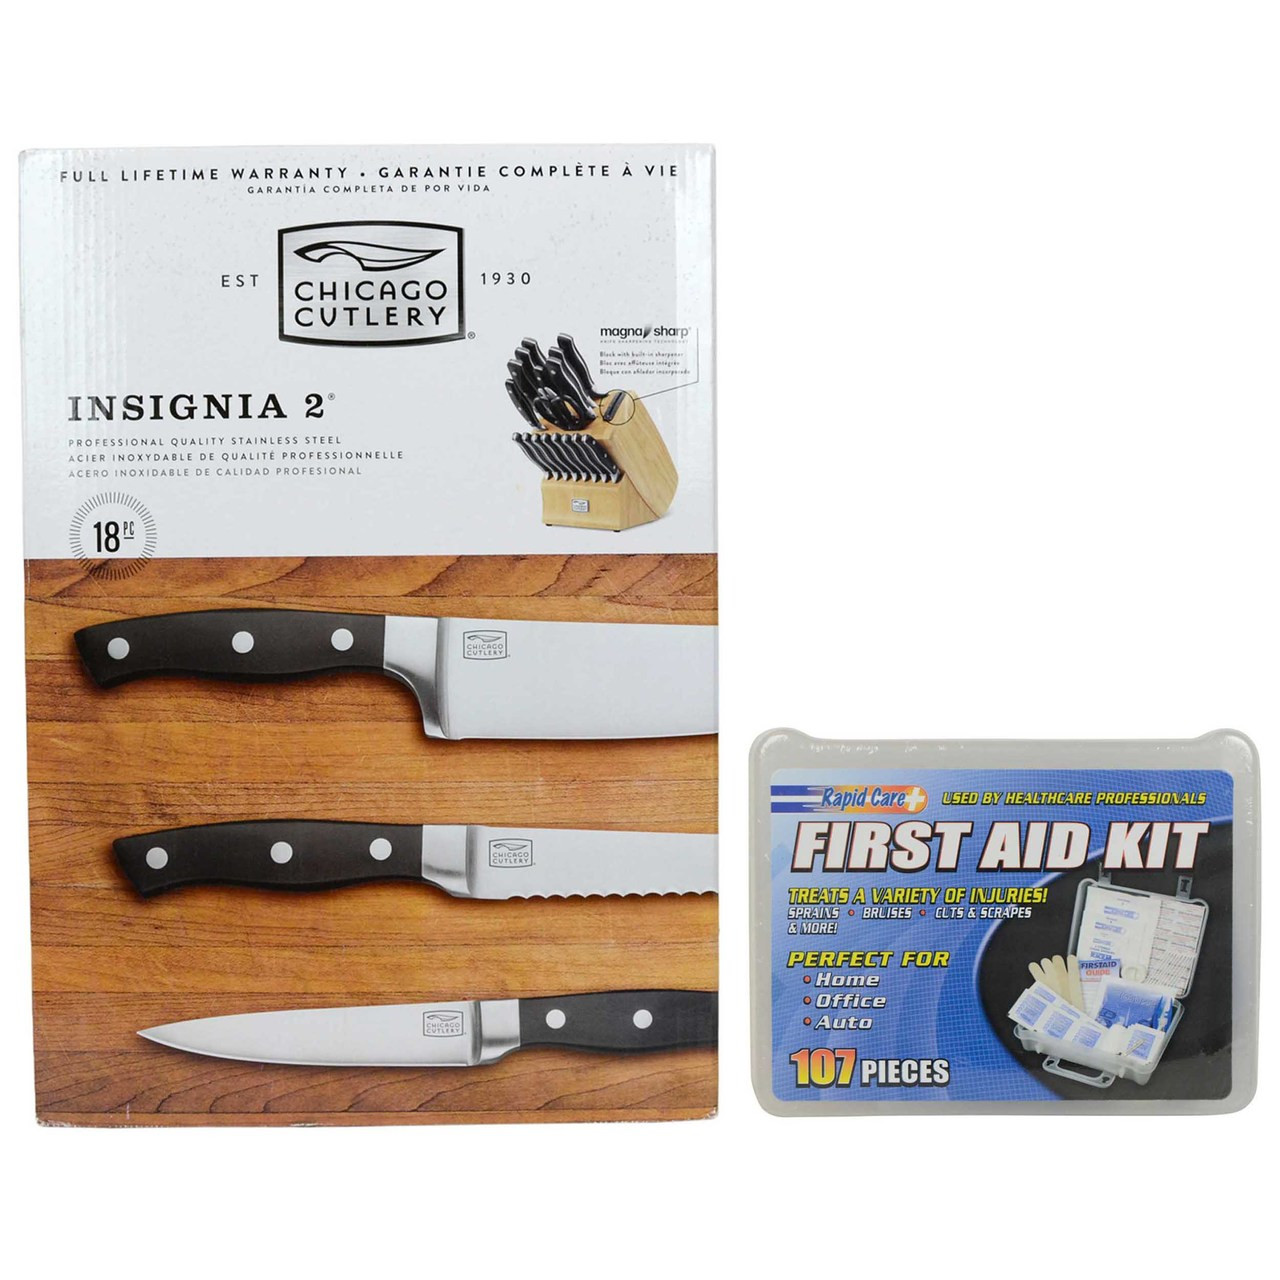 Chicago Cutlery Insignia Stainless Steel 18-PcKnife Block Set